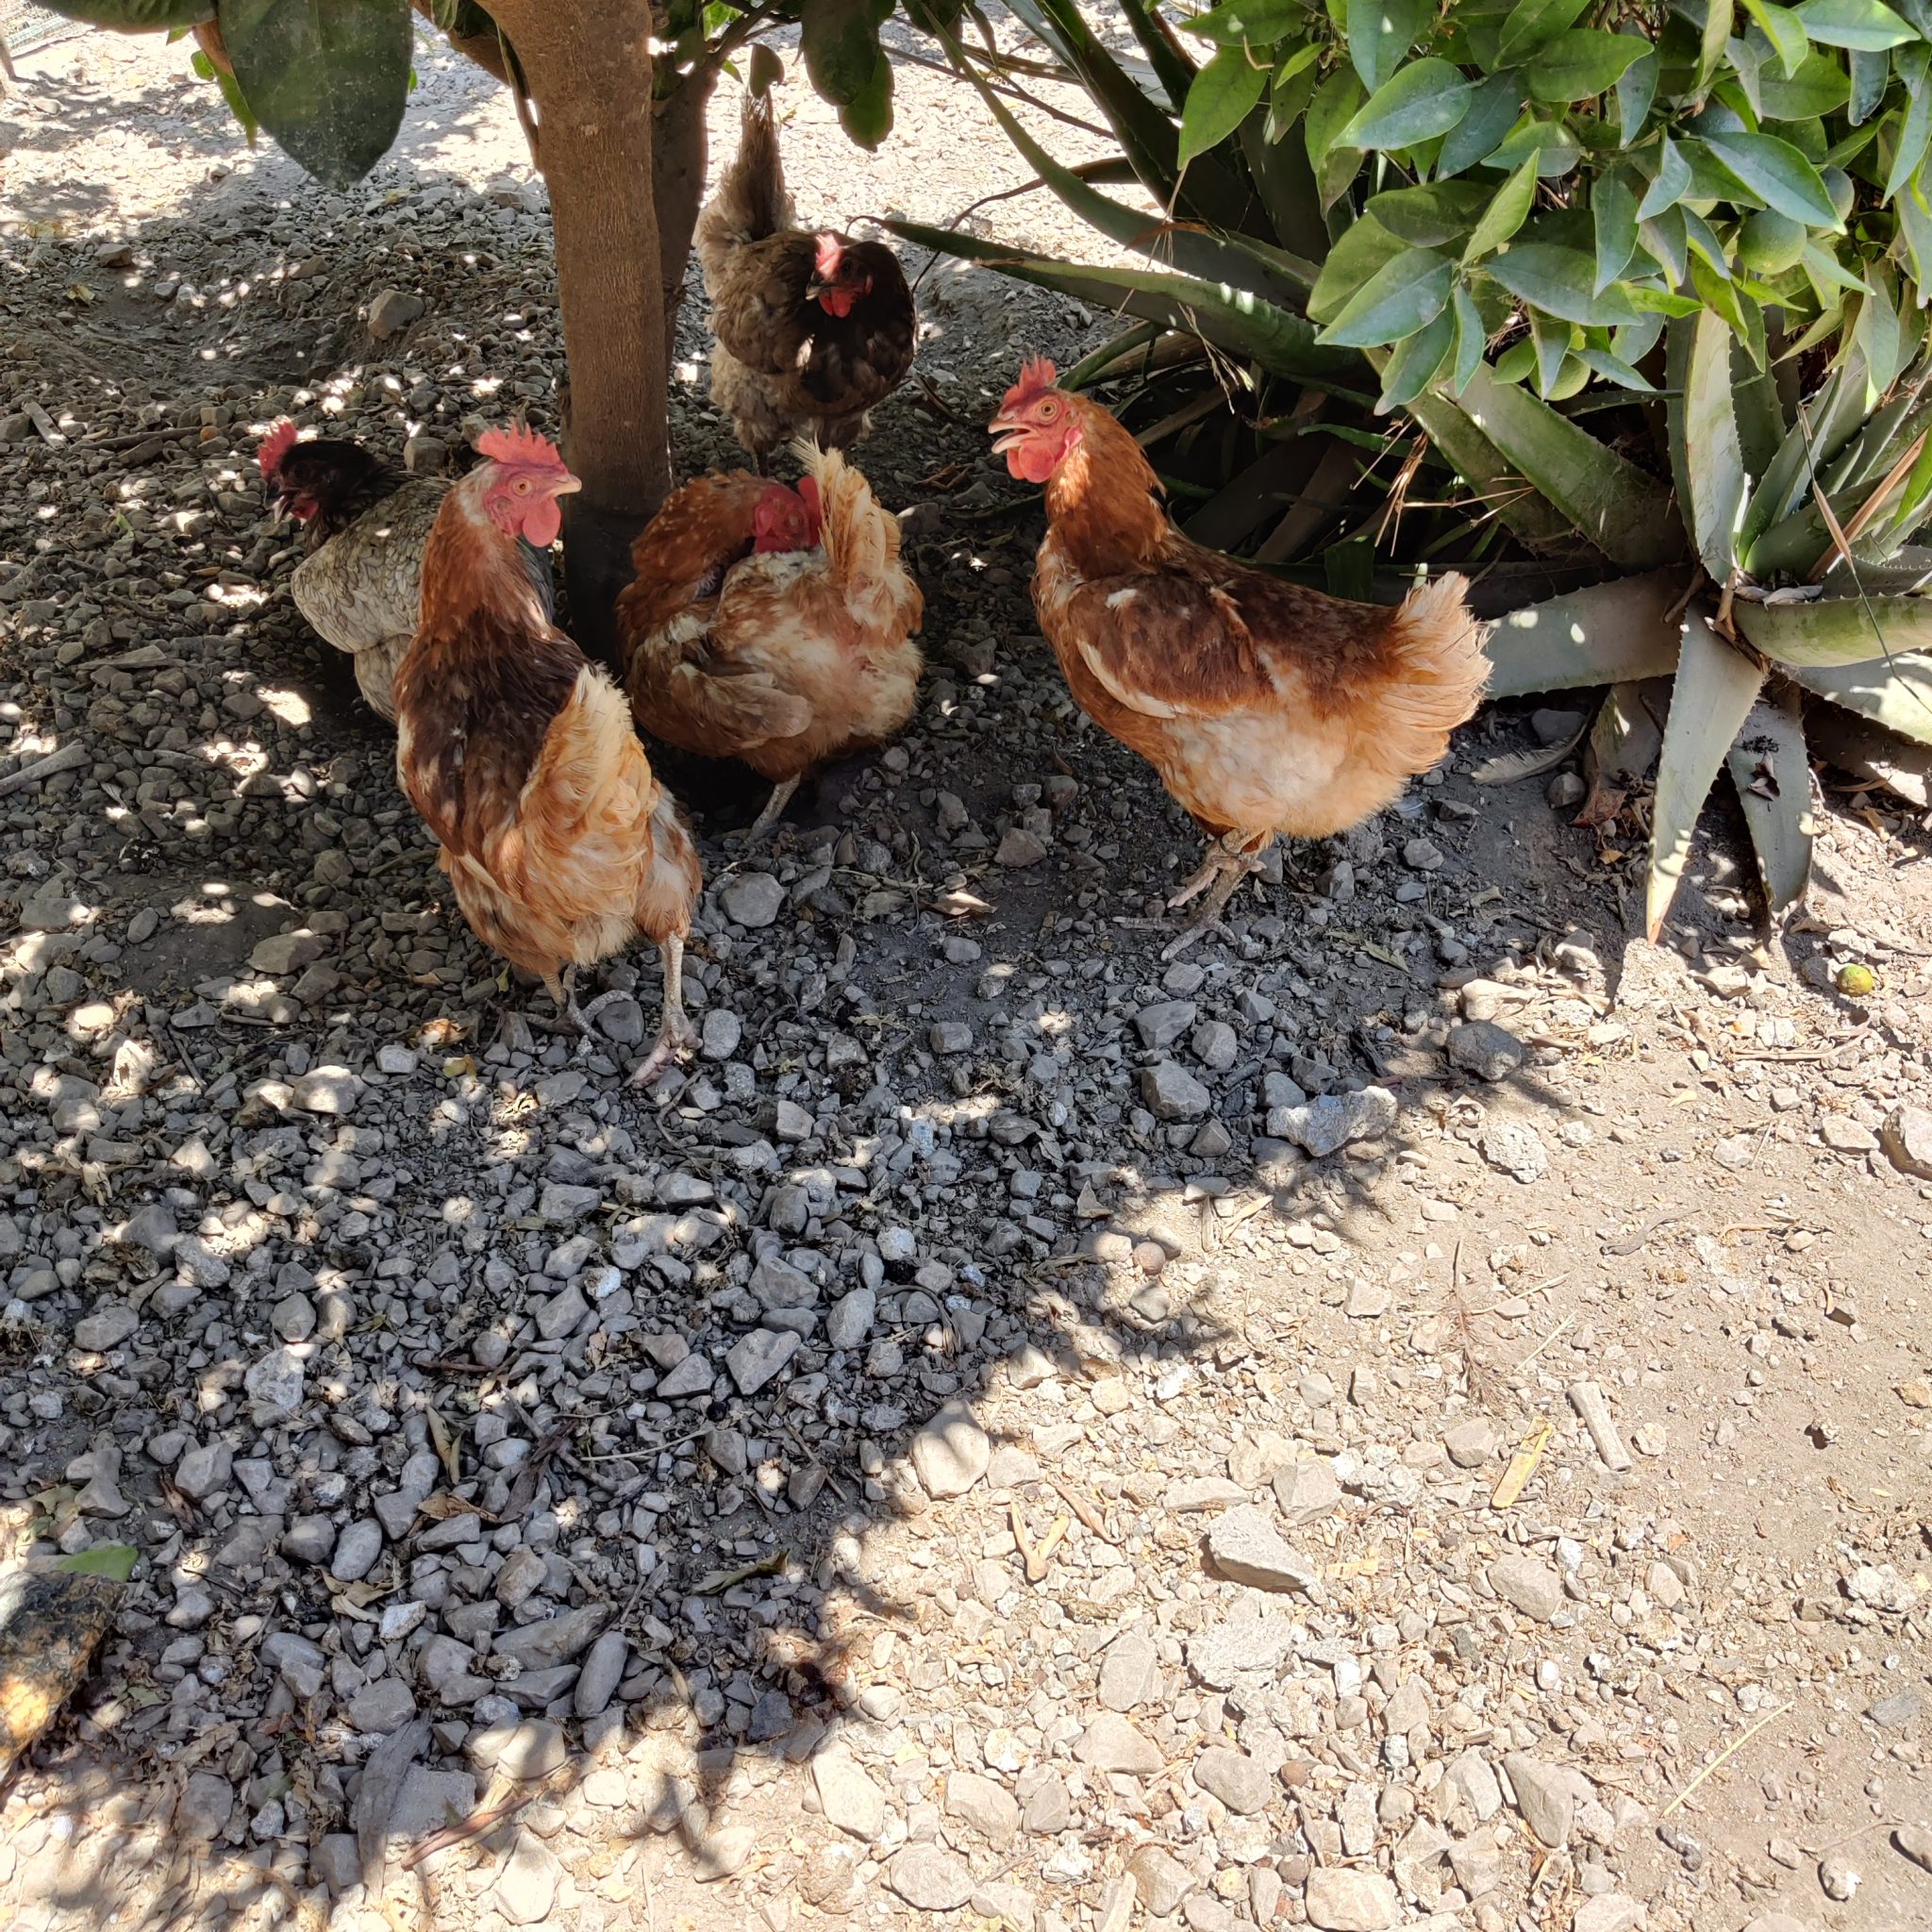 Five chickens under a tree in the shade, standing on some gravel. One is looking at us.